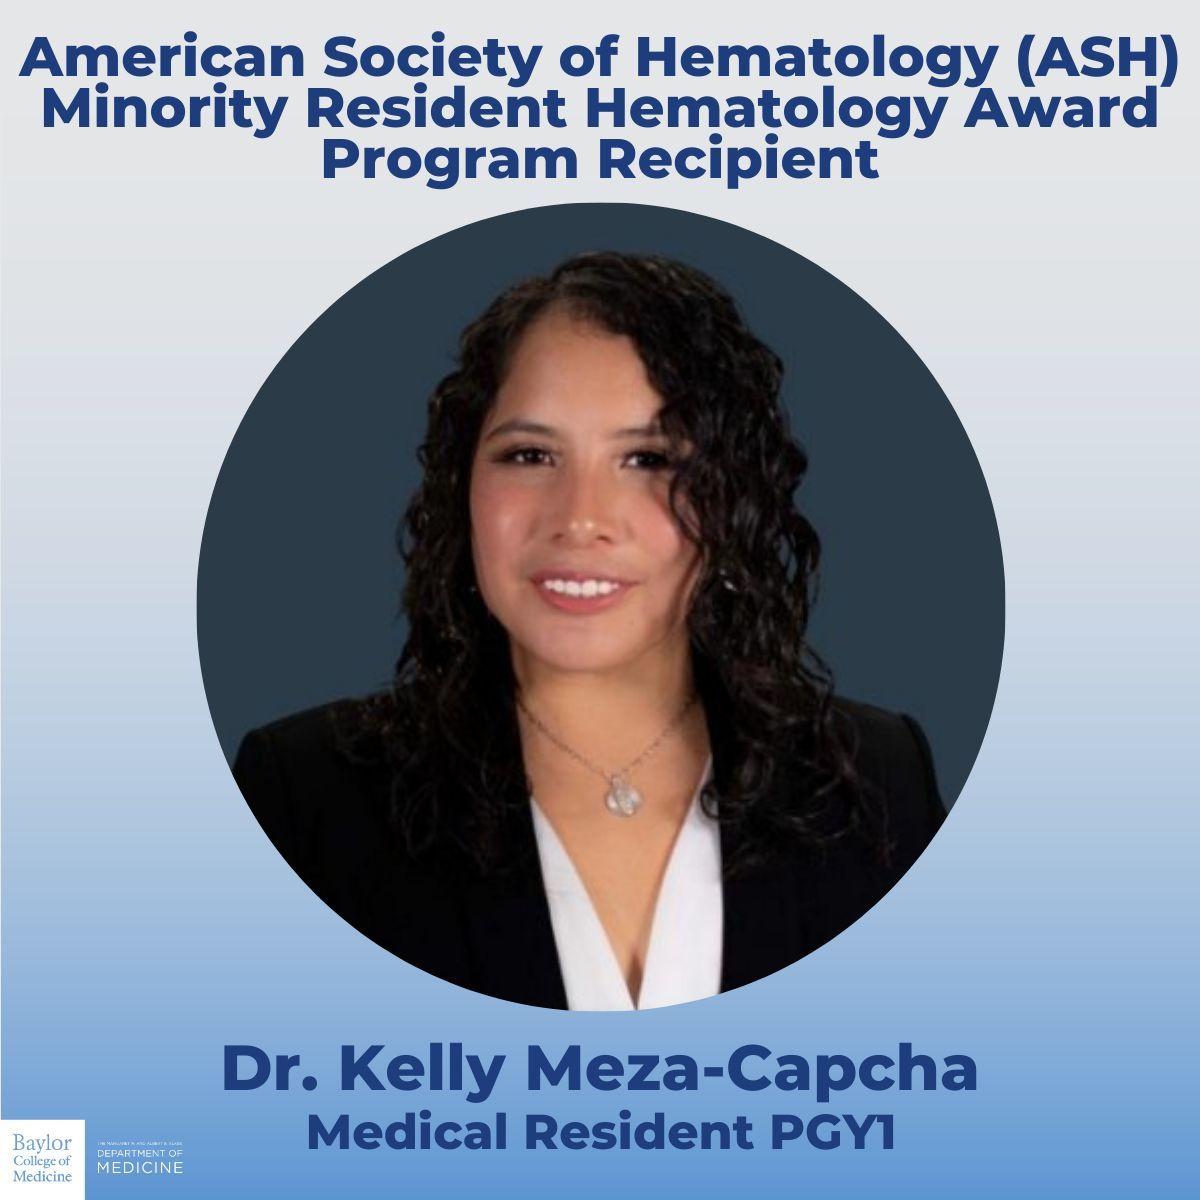 🚨Thrilled to announce that Dr. Kelly Meza-Capcha @KellyMezaMD has been accepted into the ASH Minority Resident Hematology Award Program! 🎉 Congrats , Dr. Meza-Capcha! The @Florez_Lab is so proud of you👏 @ASH_hematology #ProudMoment